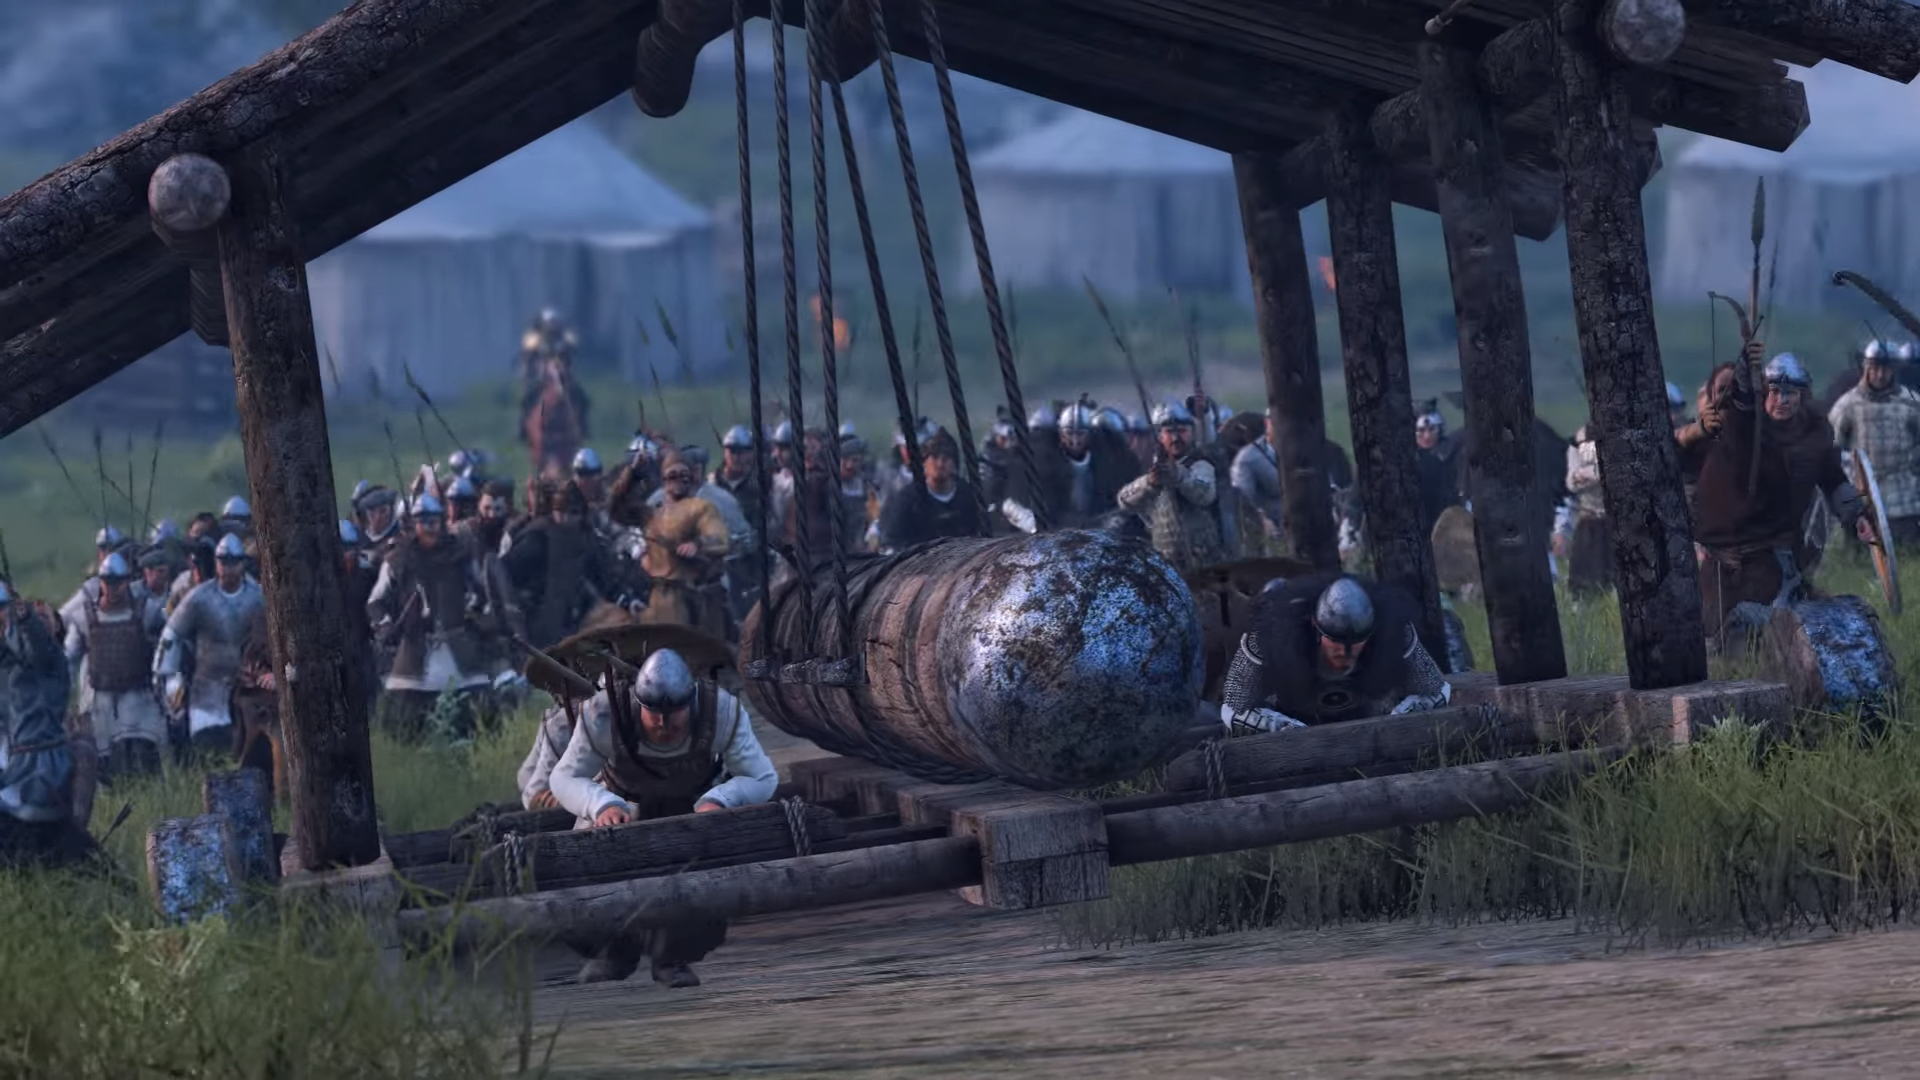 Mount and Blade 2 promises to improve the siege mechanics of its predecessor.